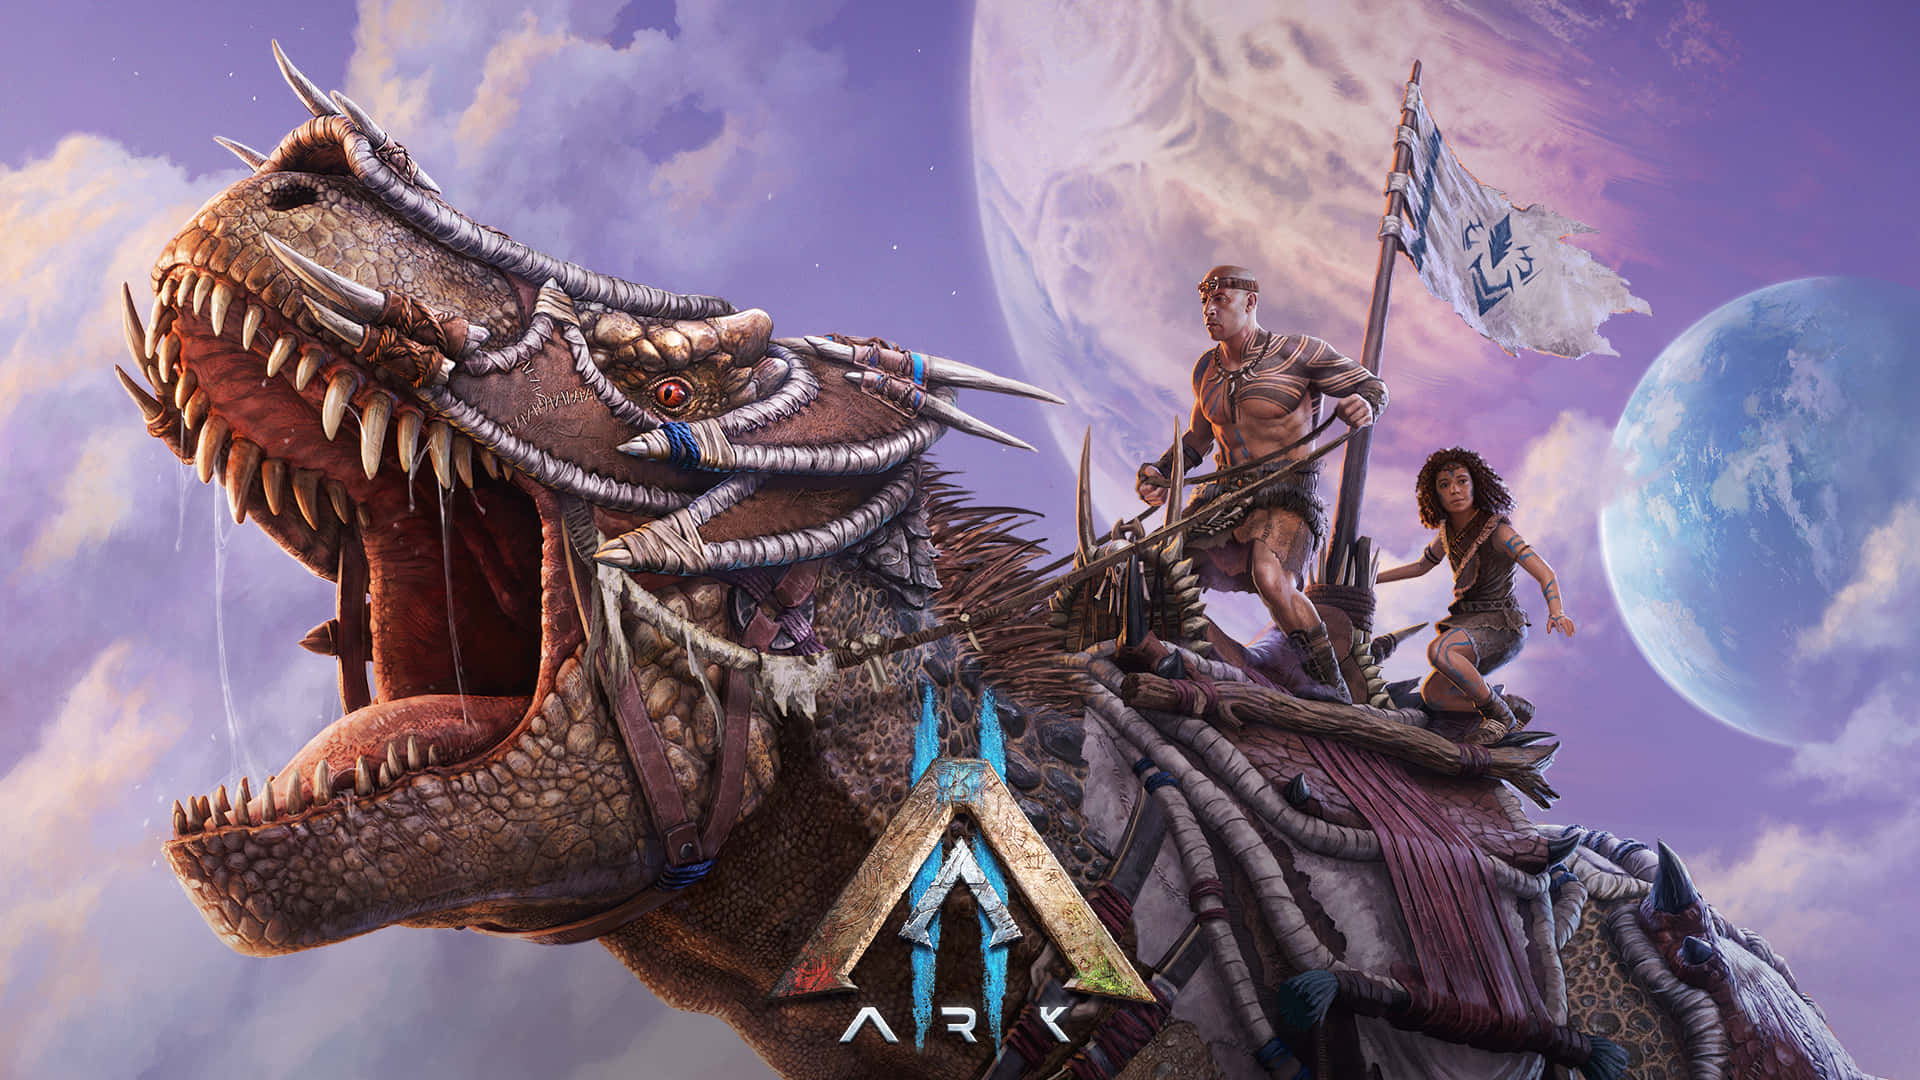 Ark Iii - A Dinosaur And Two People Riding On It Background